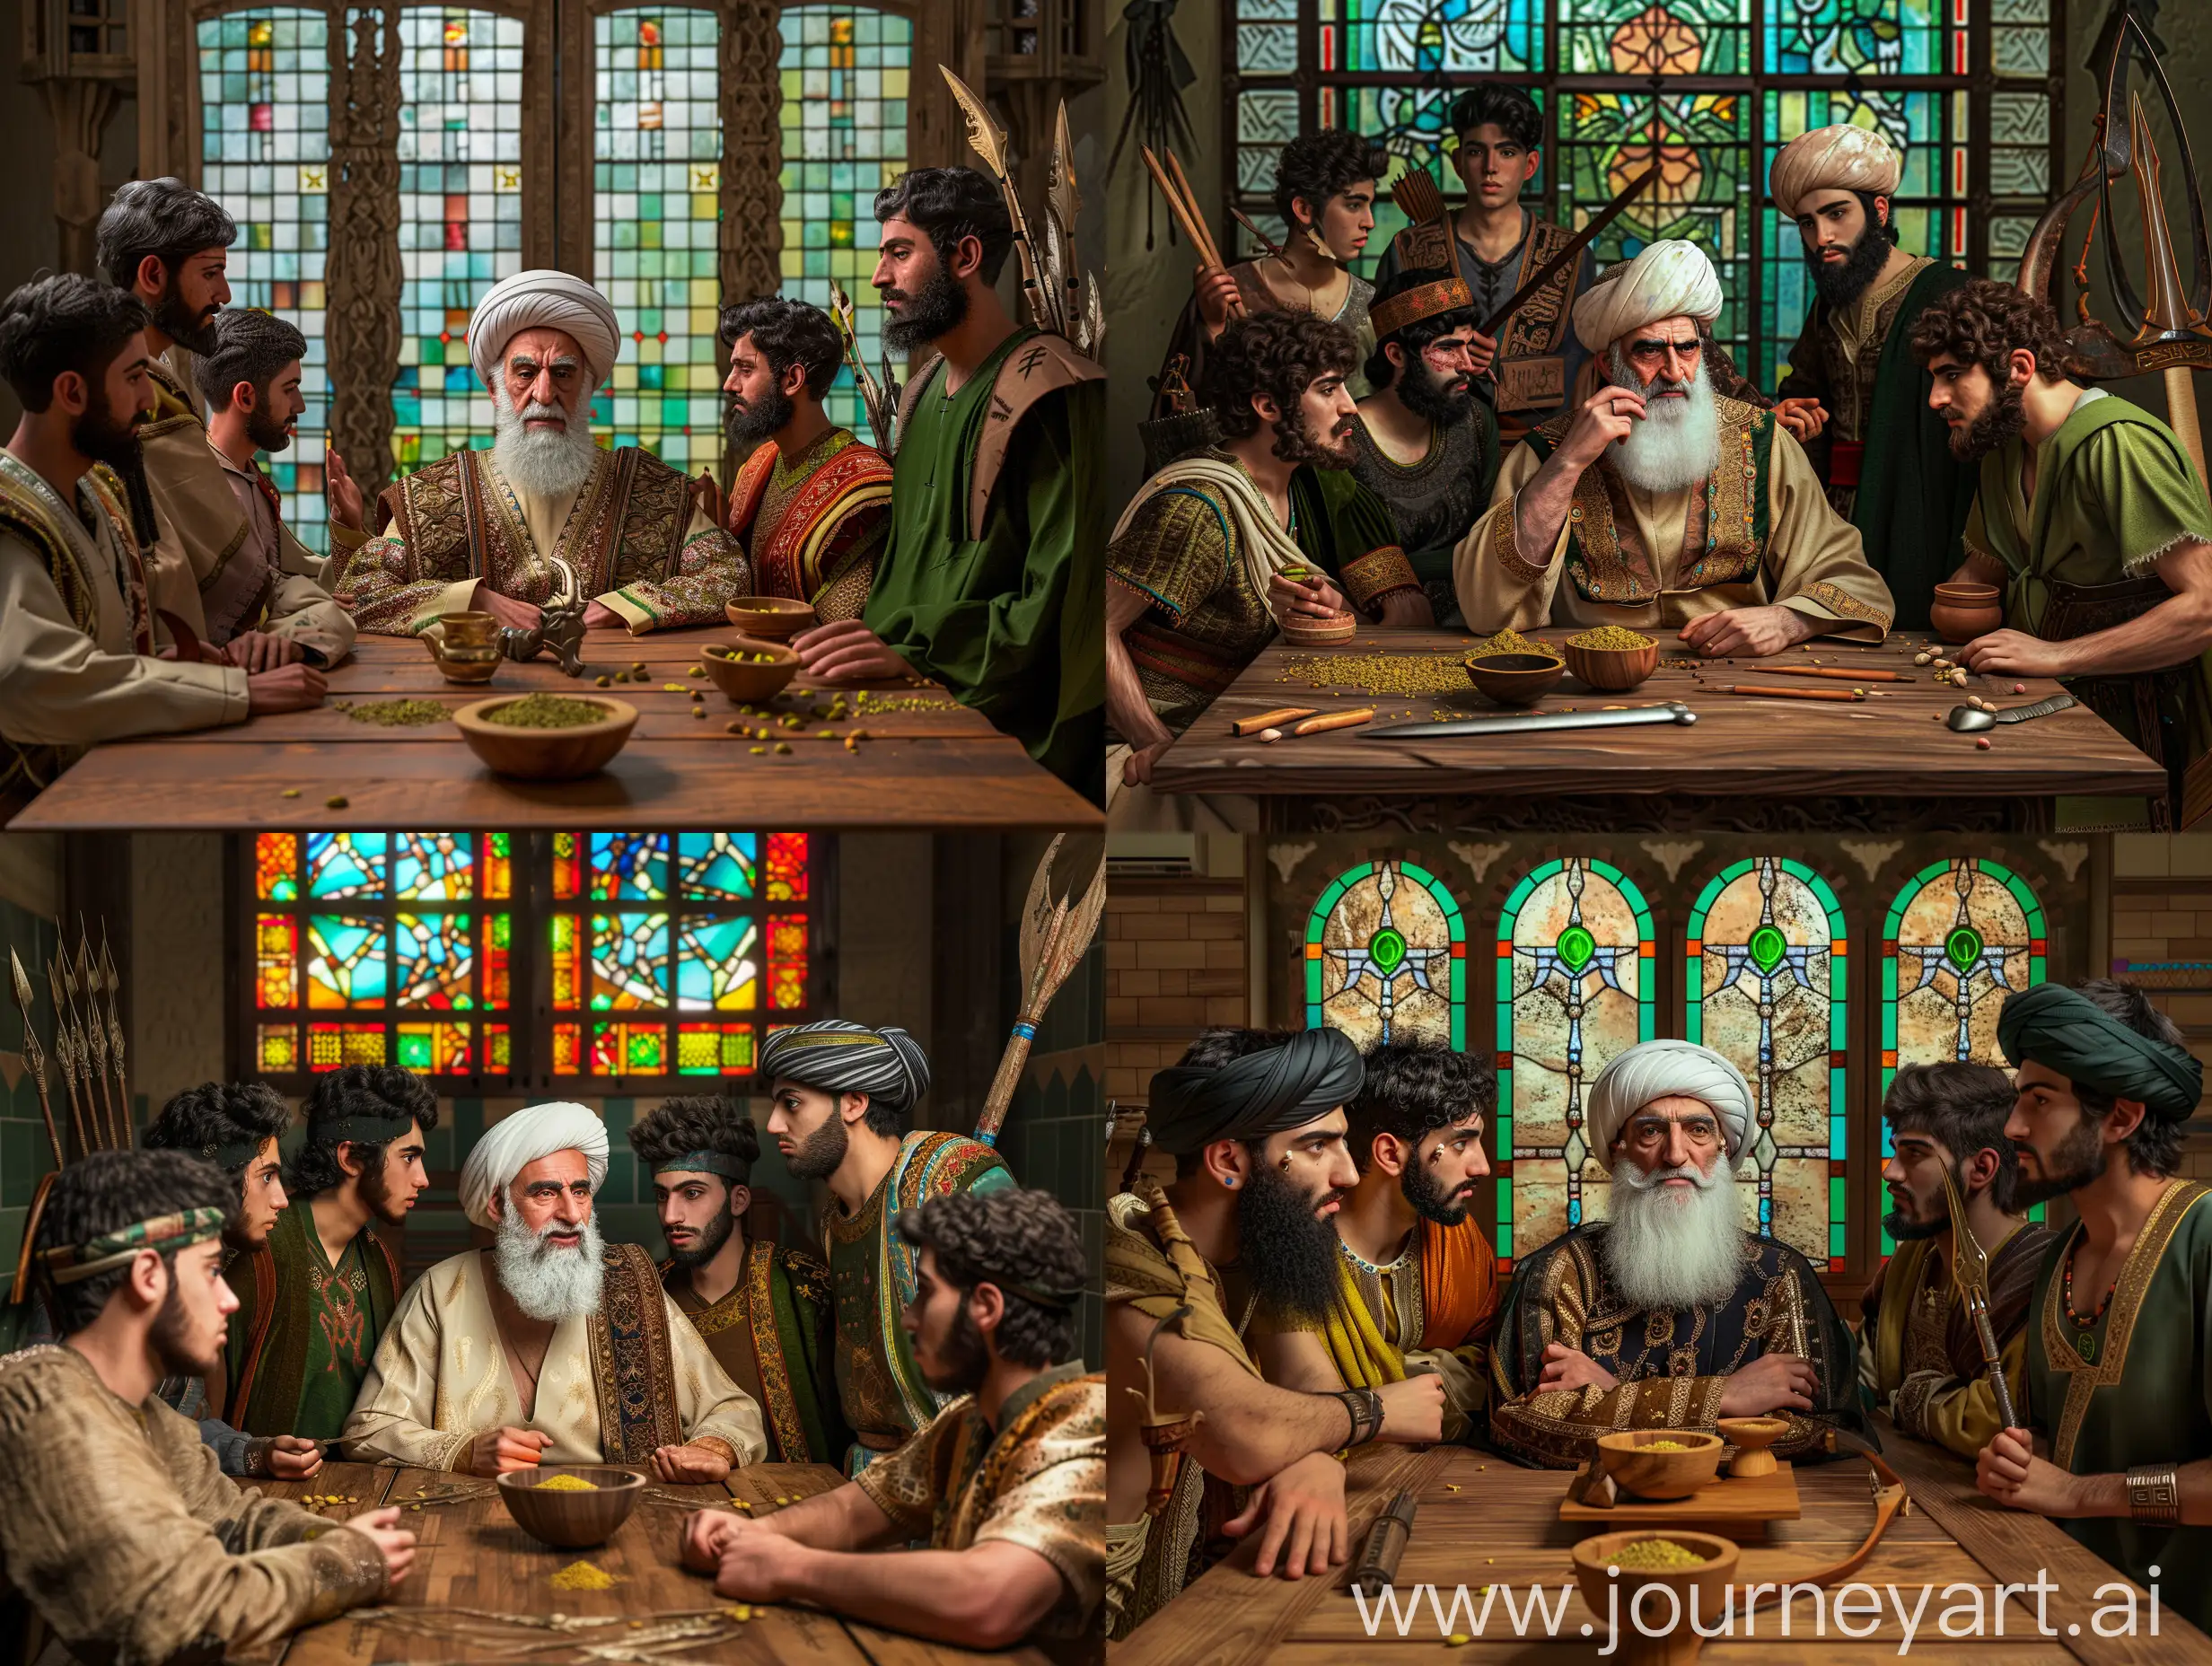 In a traditional house in ancient Iran with stained glass, a middle-aged man with a white beard is sitting behind a wooden table with seven young men, the middle-aged man with a white beard is wearing a traditional Persian dress and wearing a hat shaped like a lion's head. He is thinking and the men are talking and discussing with him, one of the seven young men has a black beard and a trident in his hand and traditional clothes, another young man has a bow on his back and a short beard. And the traditional dress, another young man has two swords on his back, and the Persian traditional dress, the other young man has a beard, and the ancient Iranian blacksmith dress, the other young man has a sword on his back, and another young man has a beard, and the green traditional dress And another young man has a beard and is thinking, on a wooden table there is pistachio powder in a wooden cup, make me a real photo with fine details and hight resulation
